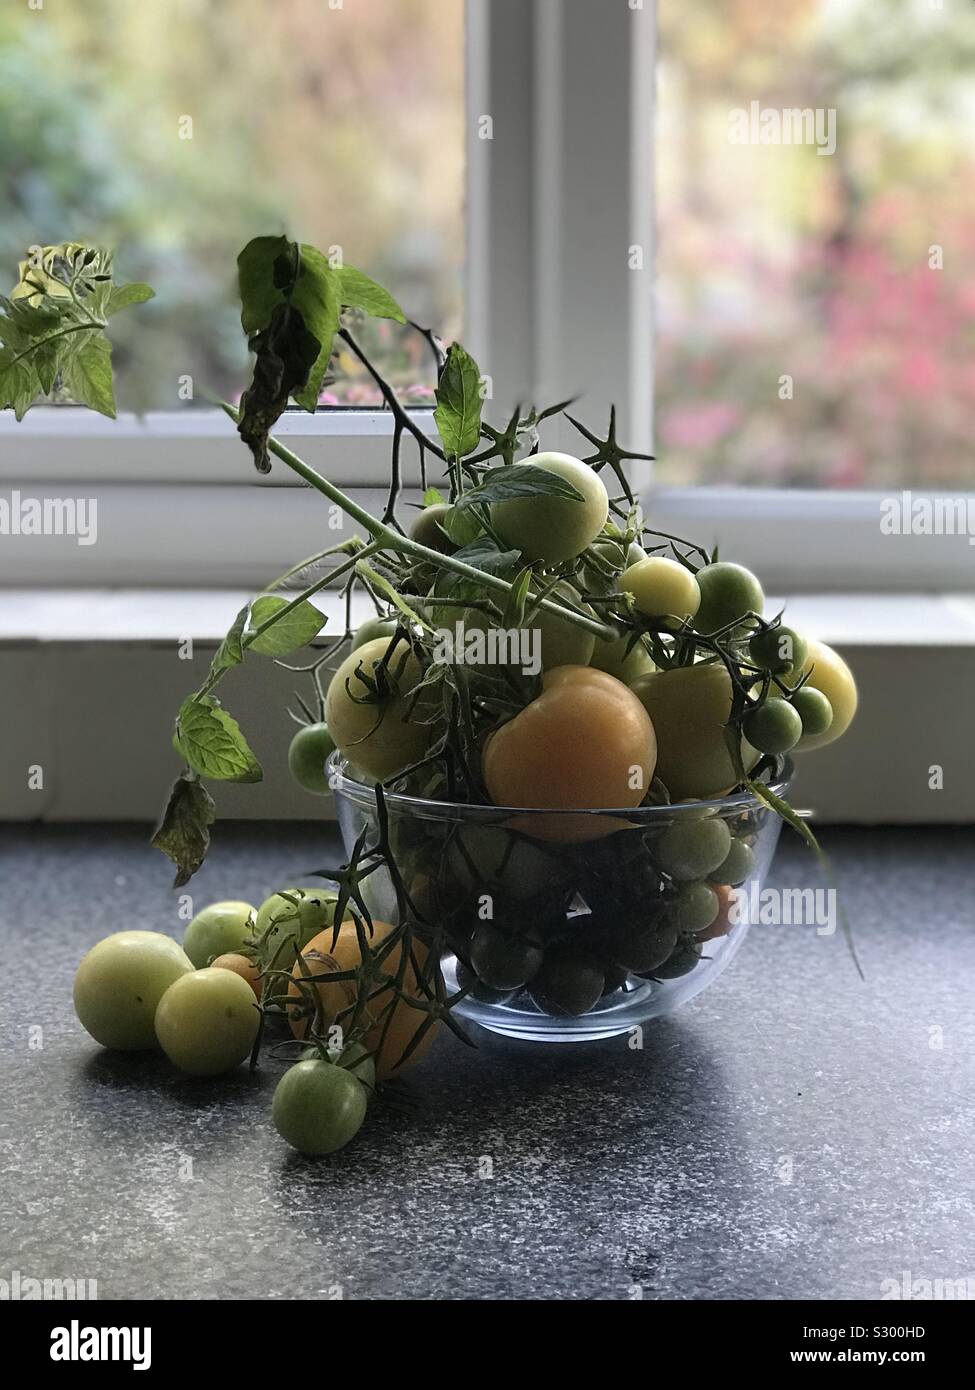 Green tomatoes ripening in a bowl Stock Photo